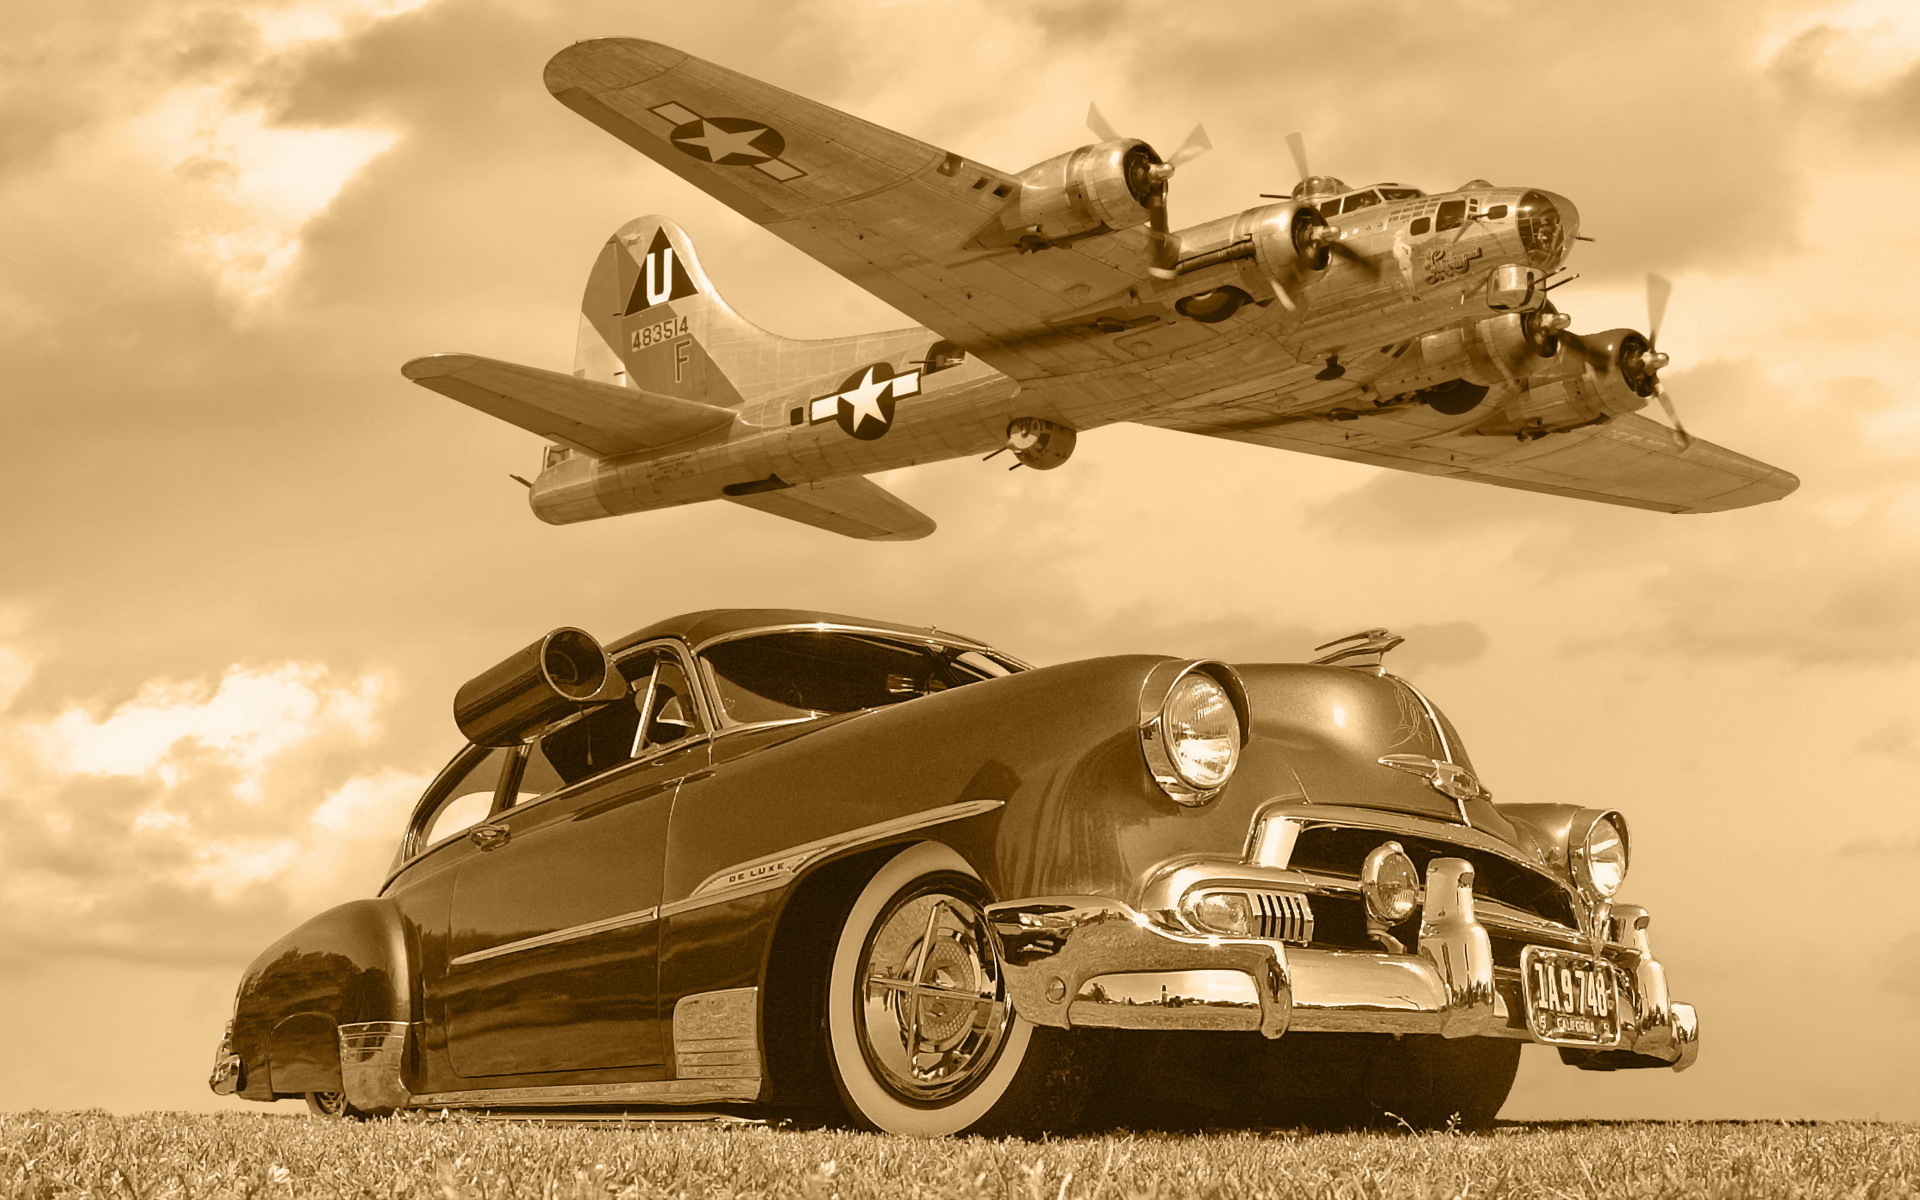 chevrolet, B17, Car, Plane, Aircrafts, Lowrider, Classic, Military, Flight, Fly, Sepia, Monochrome, Sky, Clouds Wallpaper